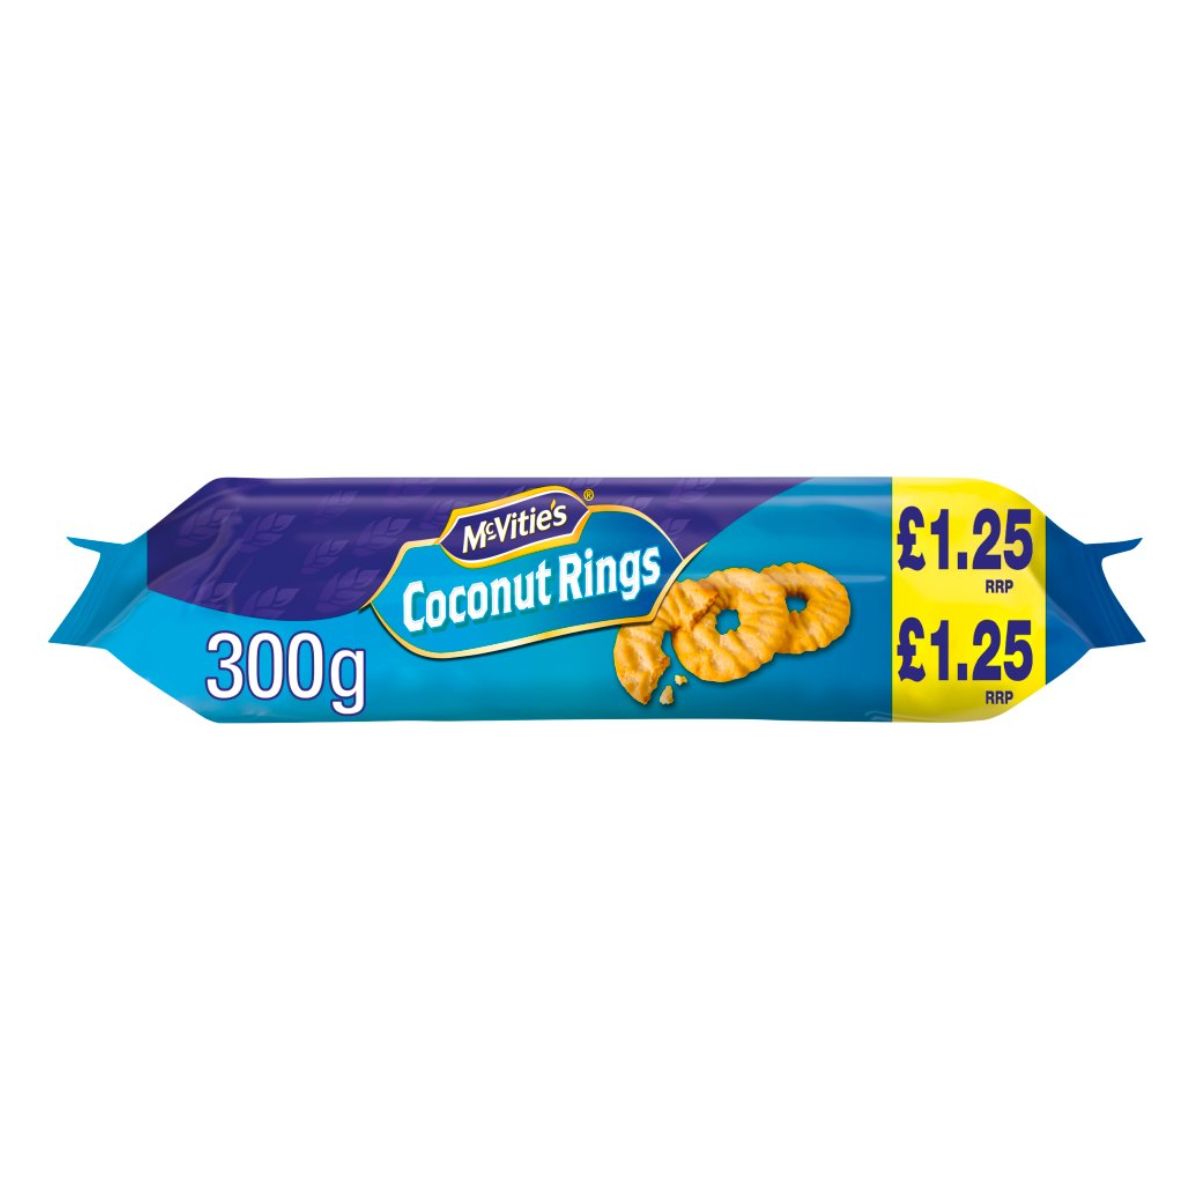 A bar of McVities - Coconut Rings Biscuits - 300g on a white background.